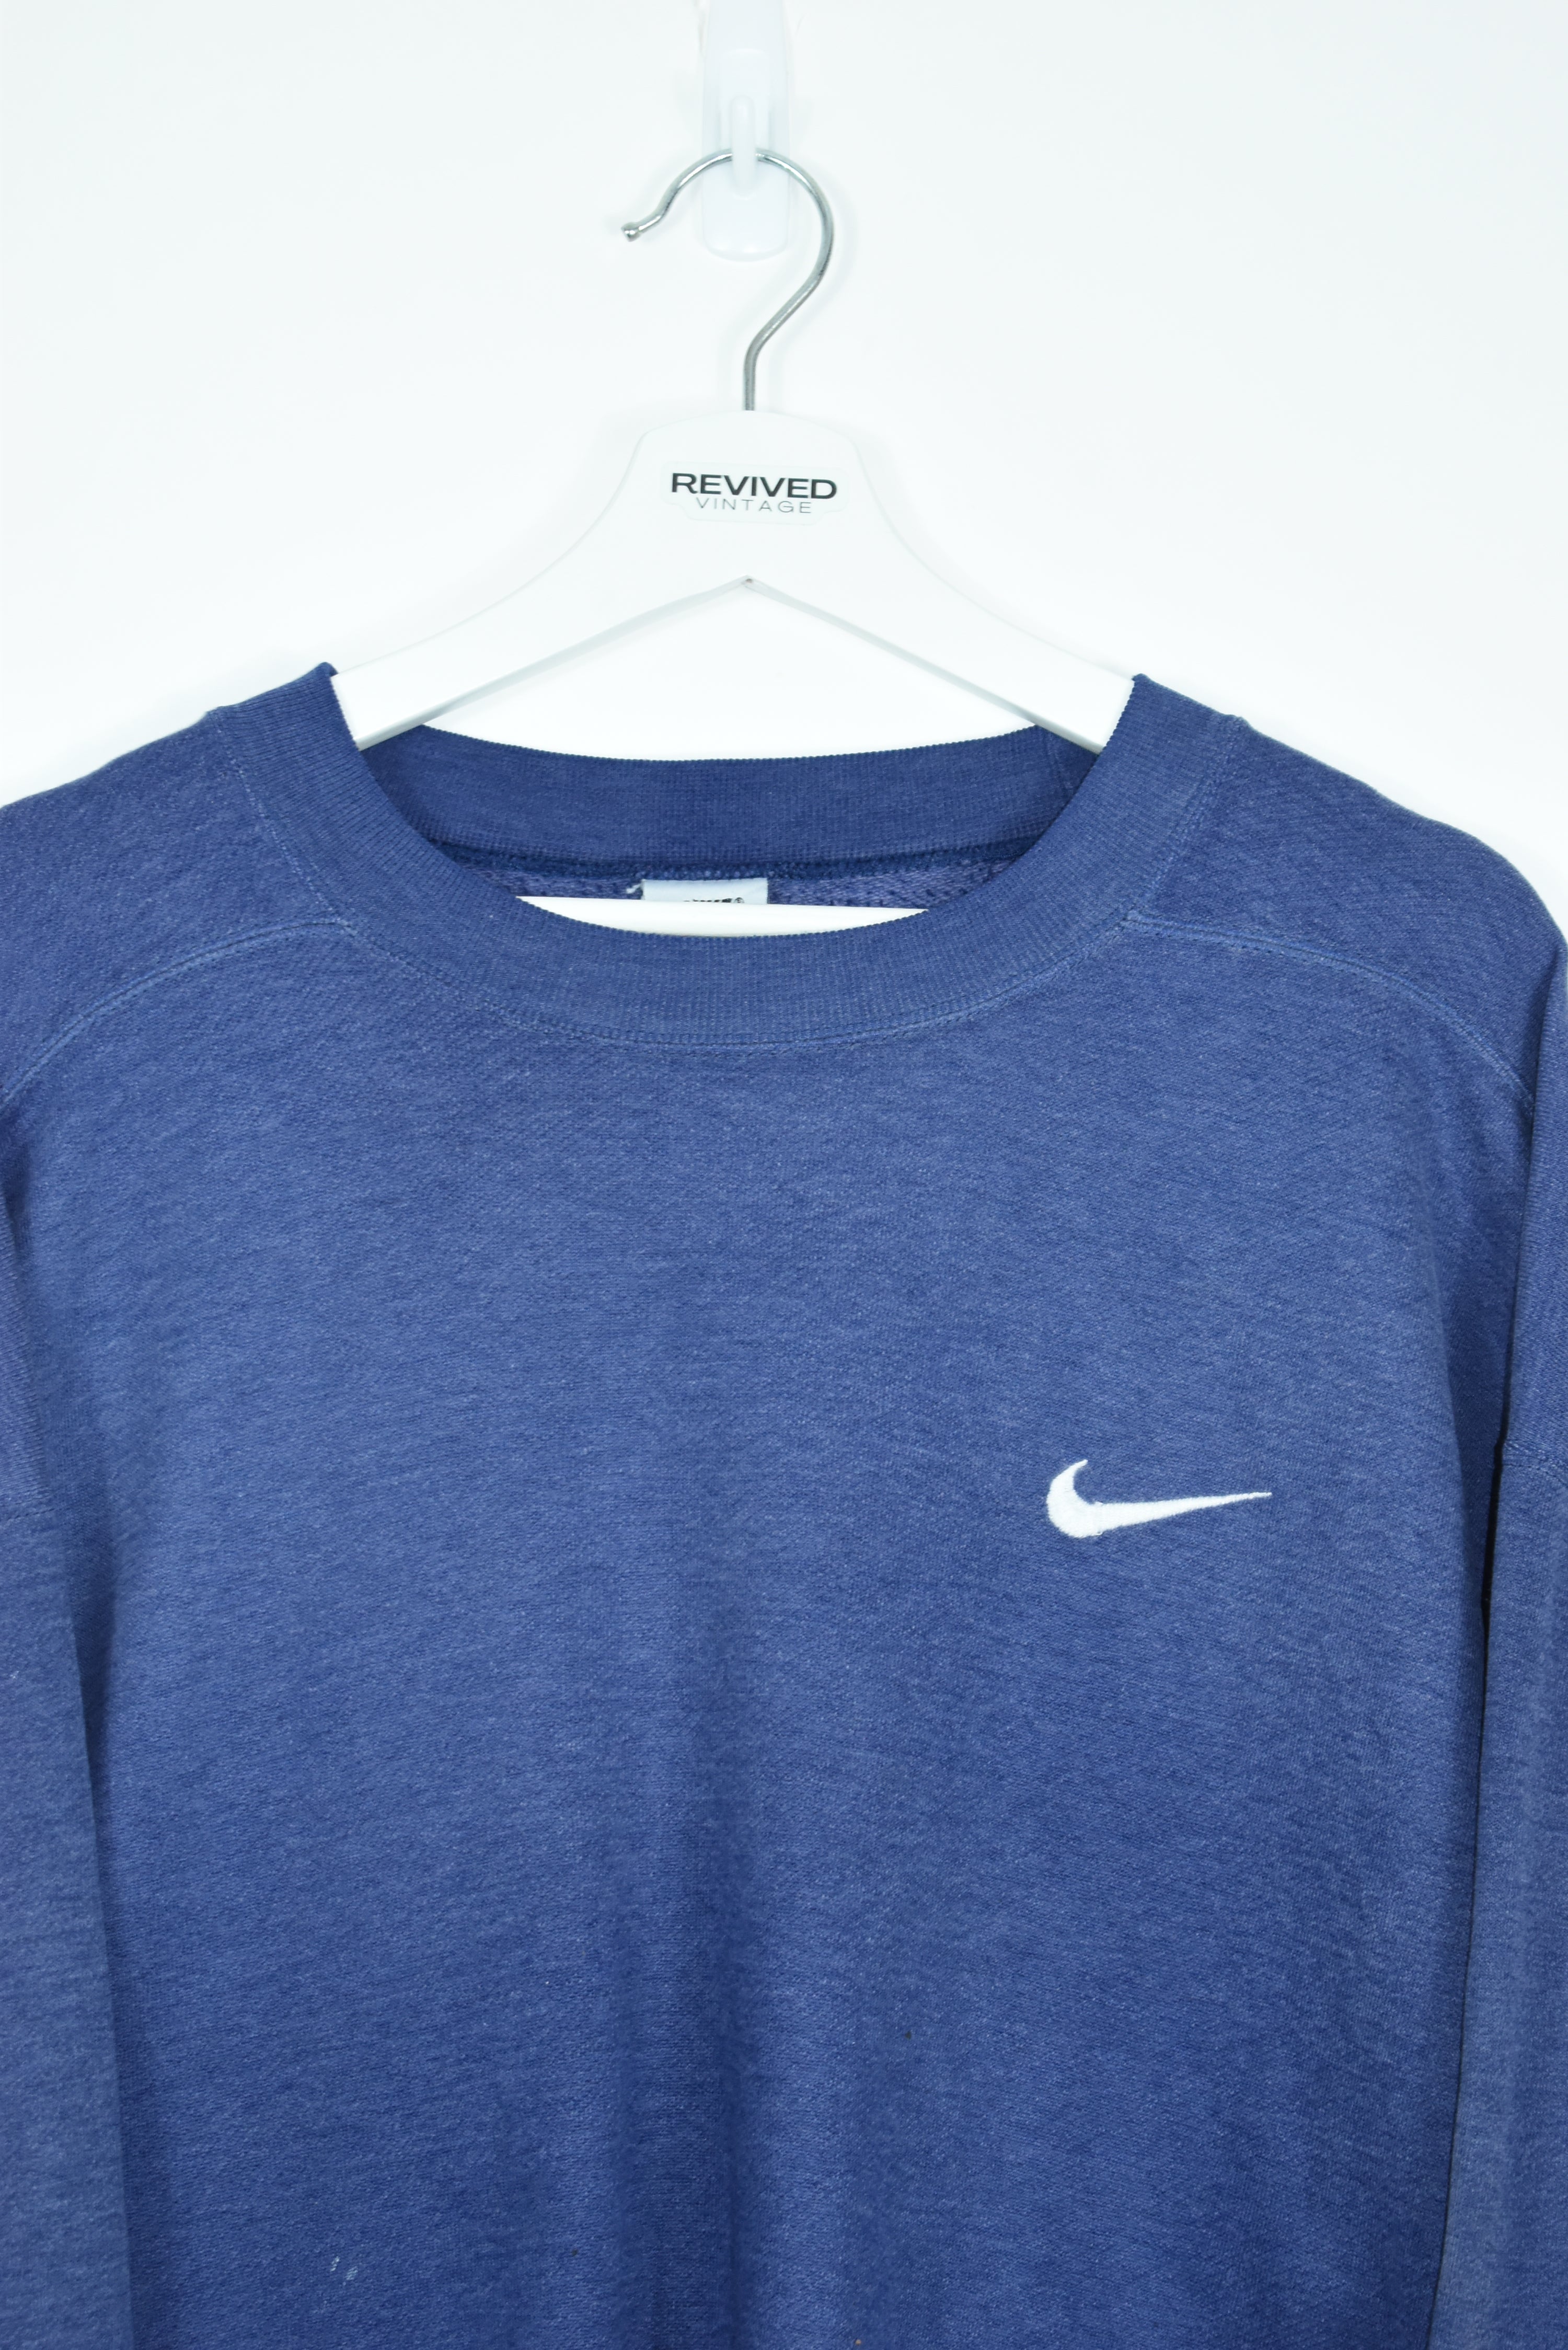 VINTAGE NIKE EMBROIDERY SMALL SWOOSH BLUE XLARGE